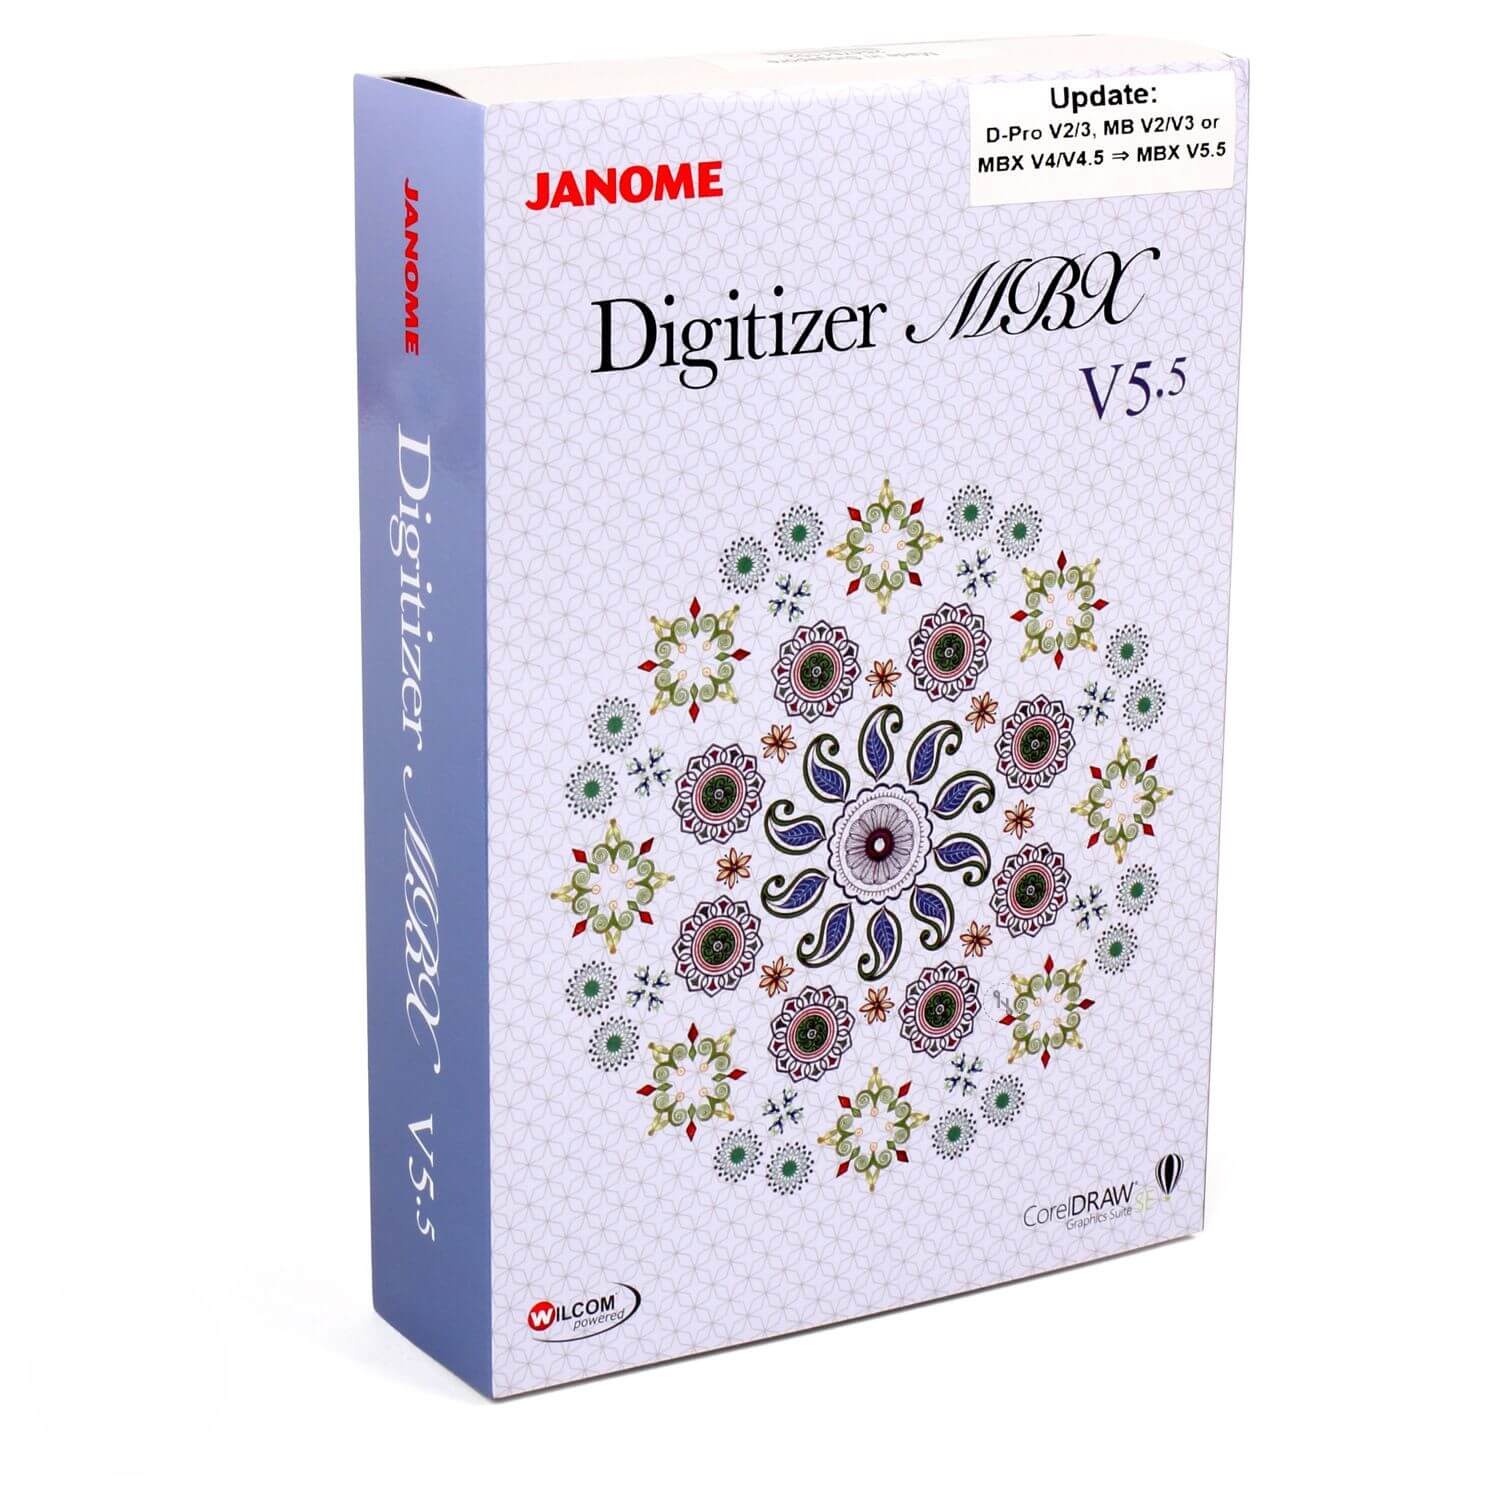 what is difference between janome mbx 5 and janome artistic digitizer